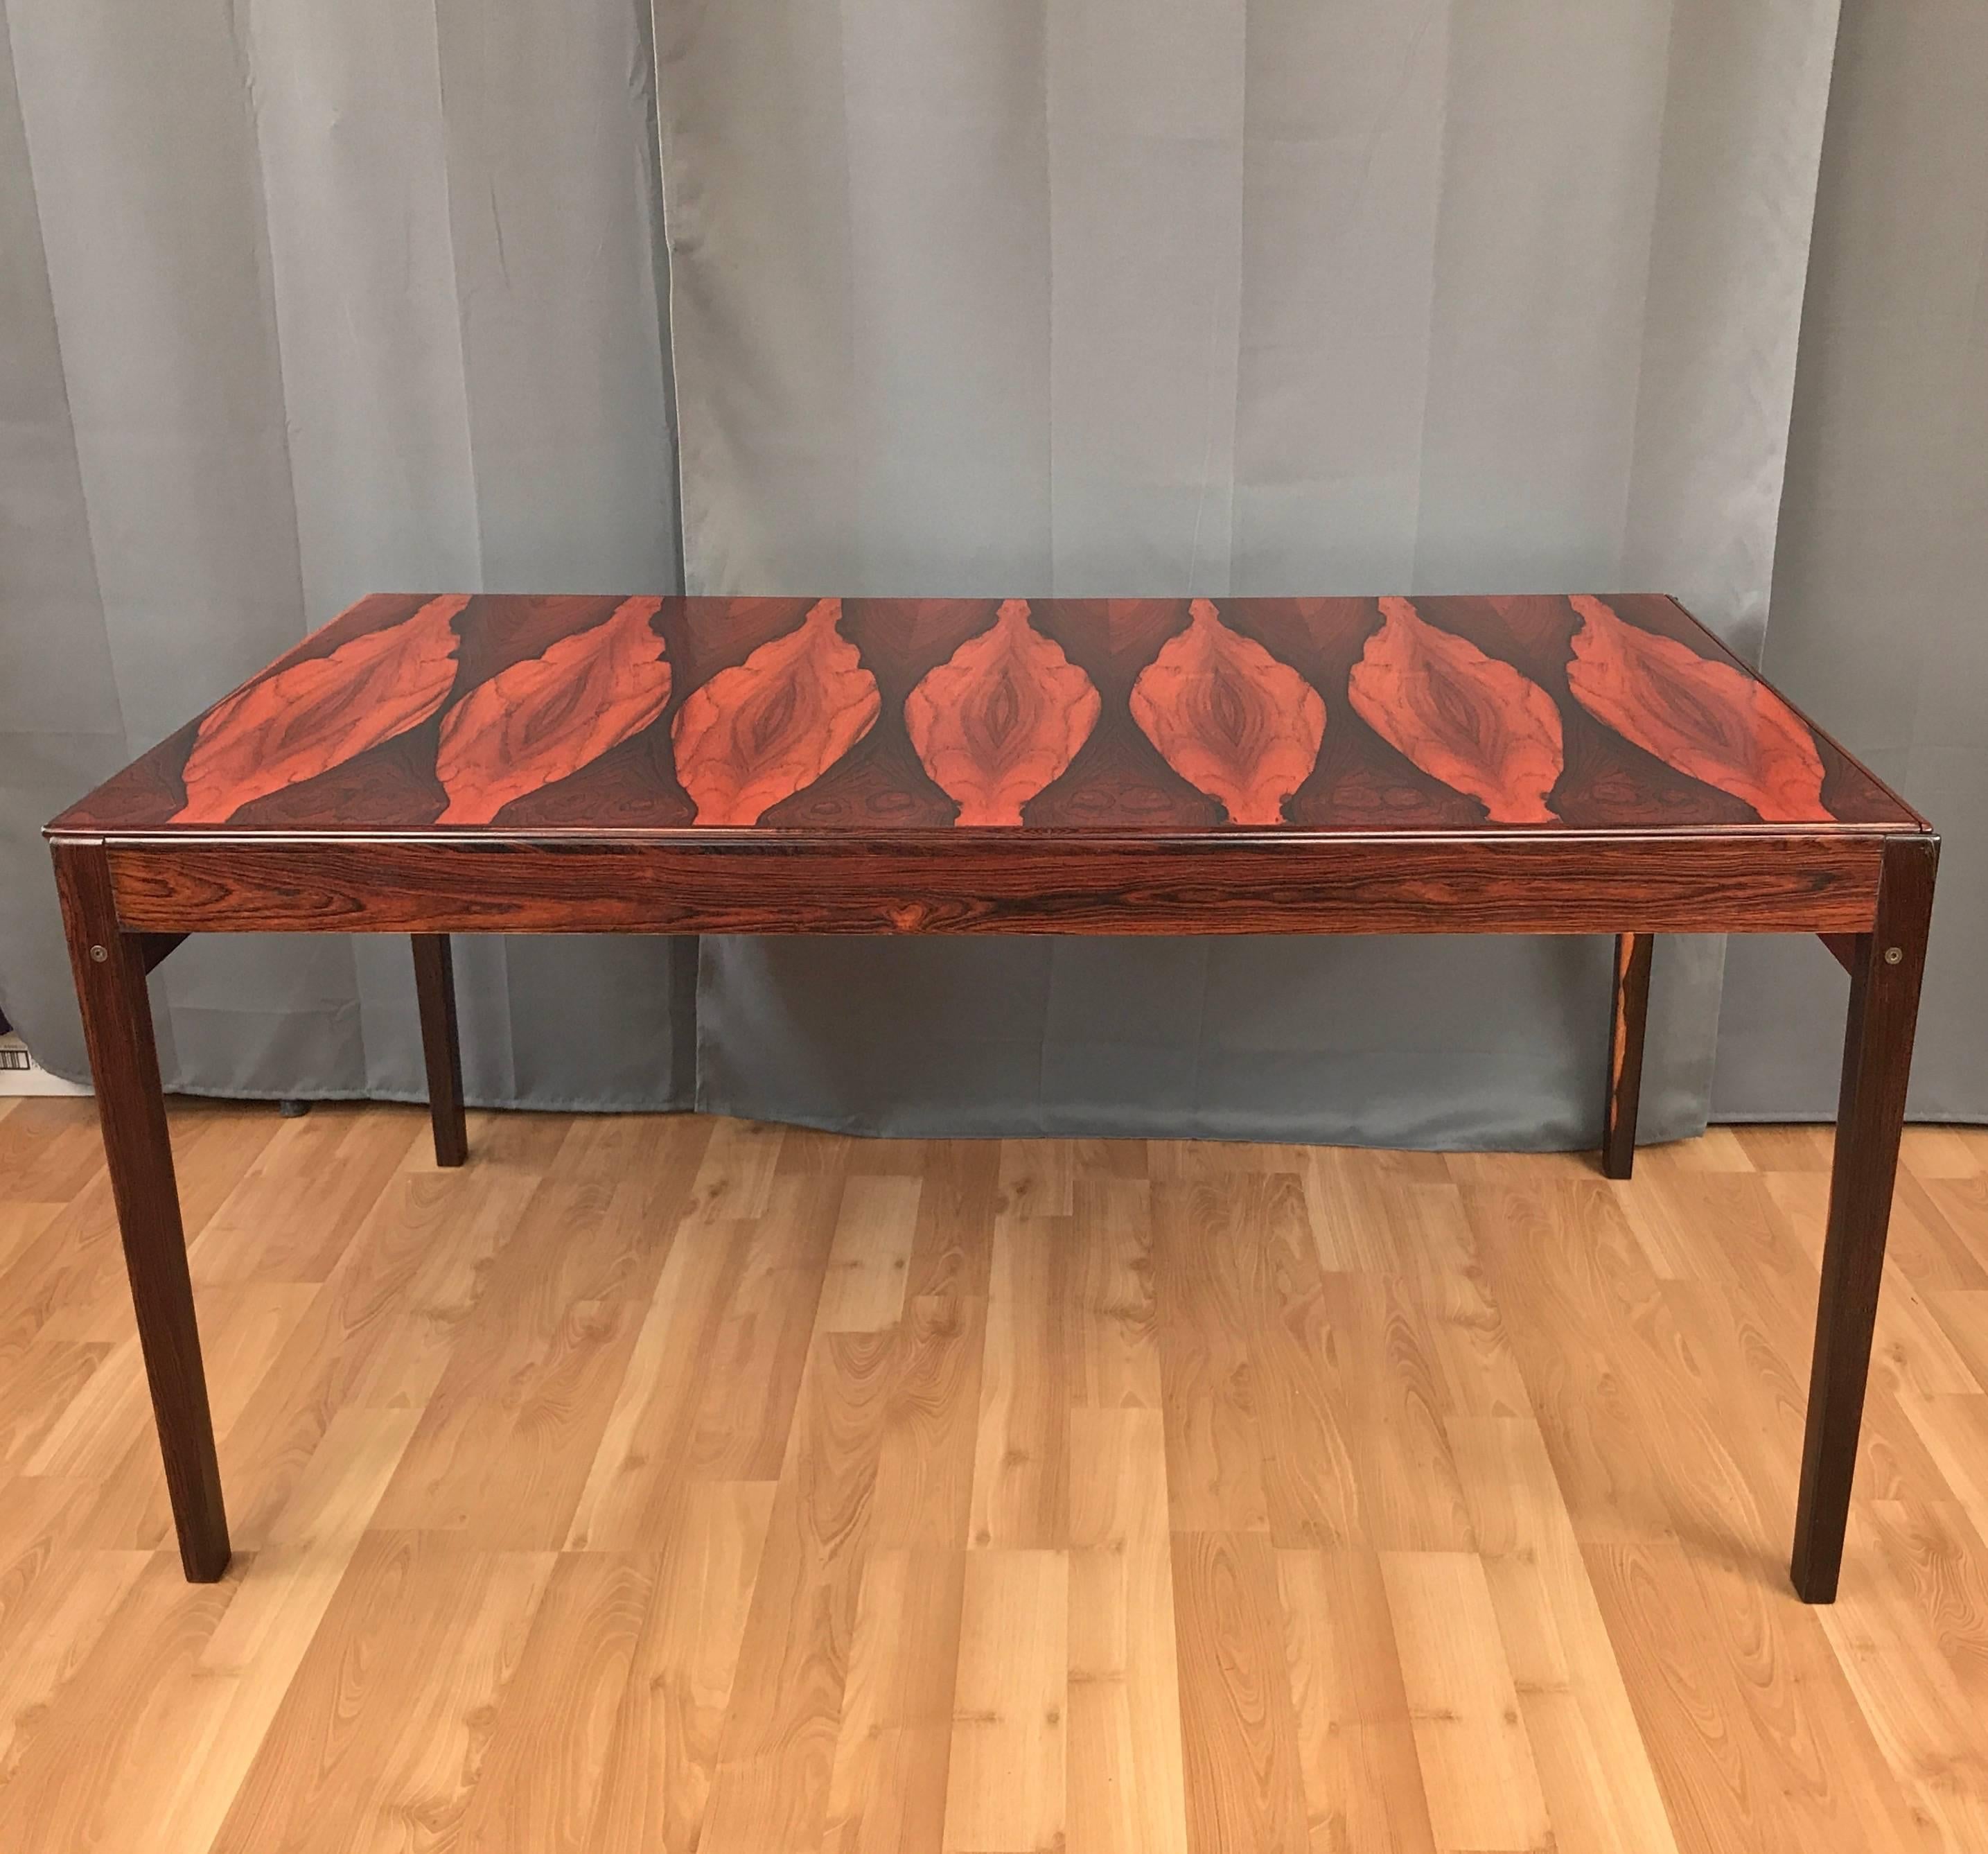 An absolutely dazzling early 1970s Danish expandable rosewood dining table with hidden cartridge leaf. Crotch cut bookmatched veneer top and solid frame display unreal grain, made all the more so by a burnt orange applied tint. Brazilian rosewood